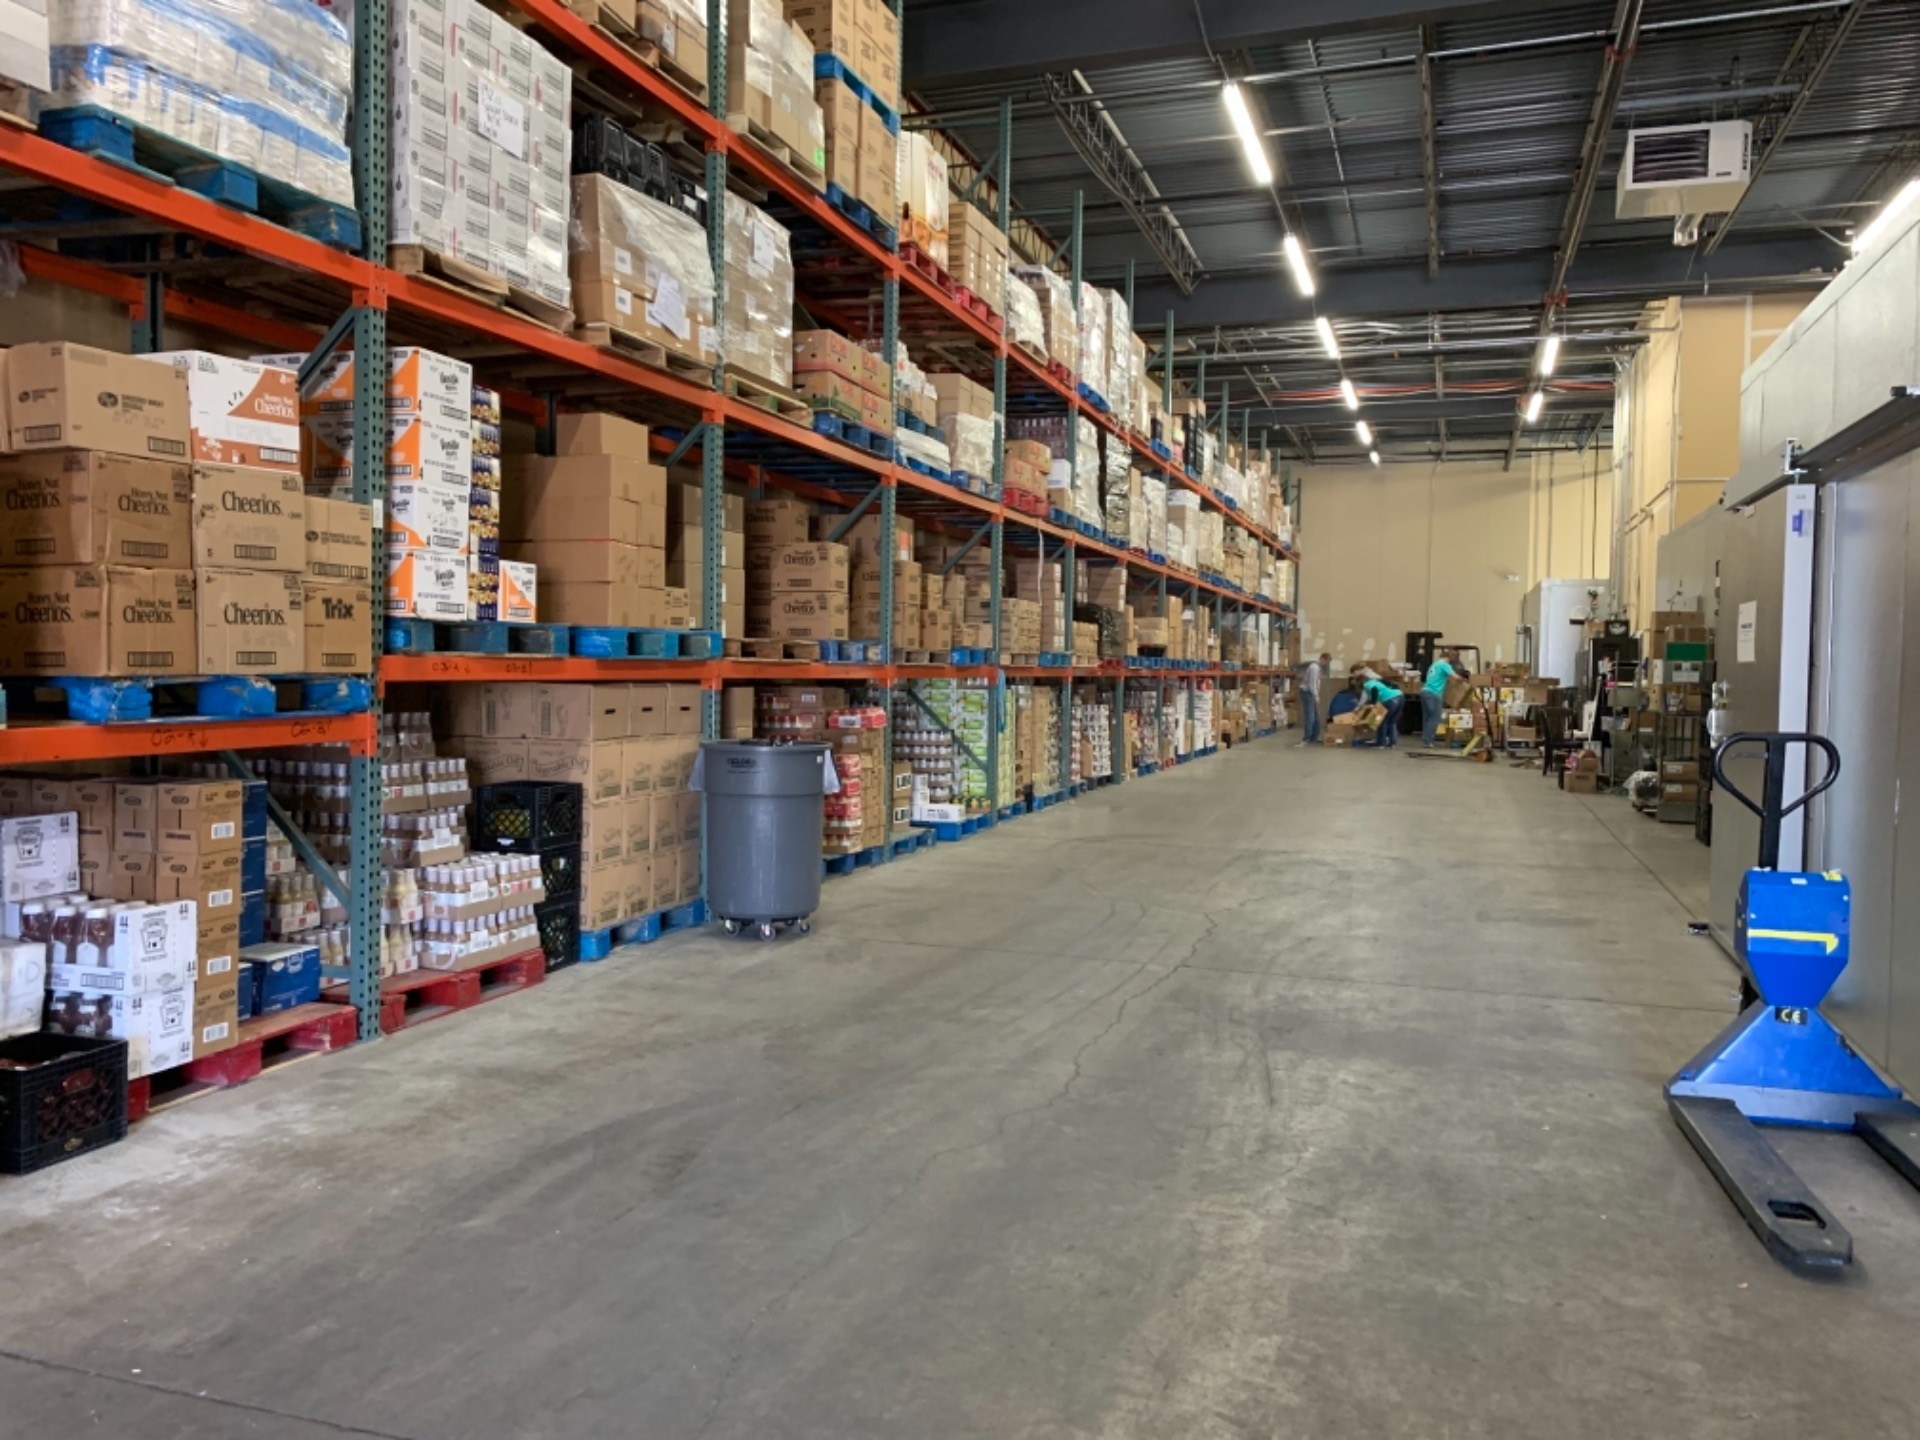 Loaves & Fishes Warehouse